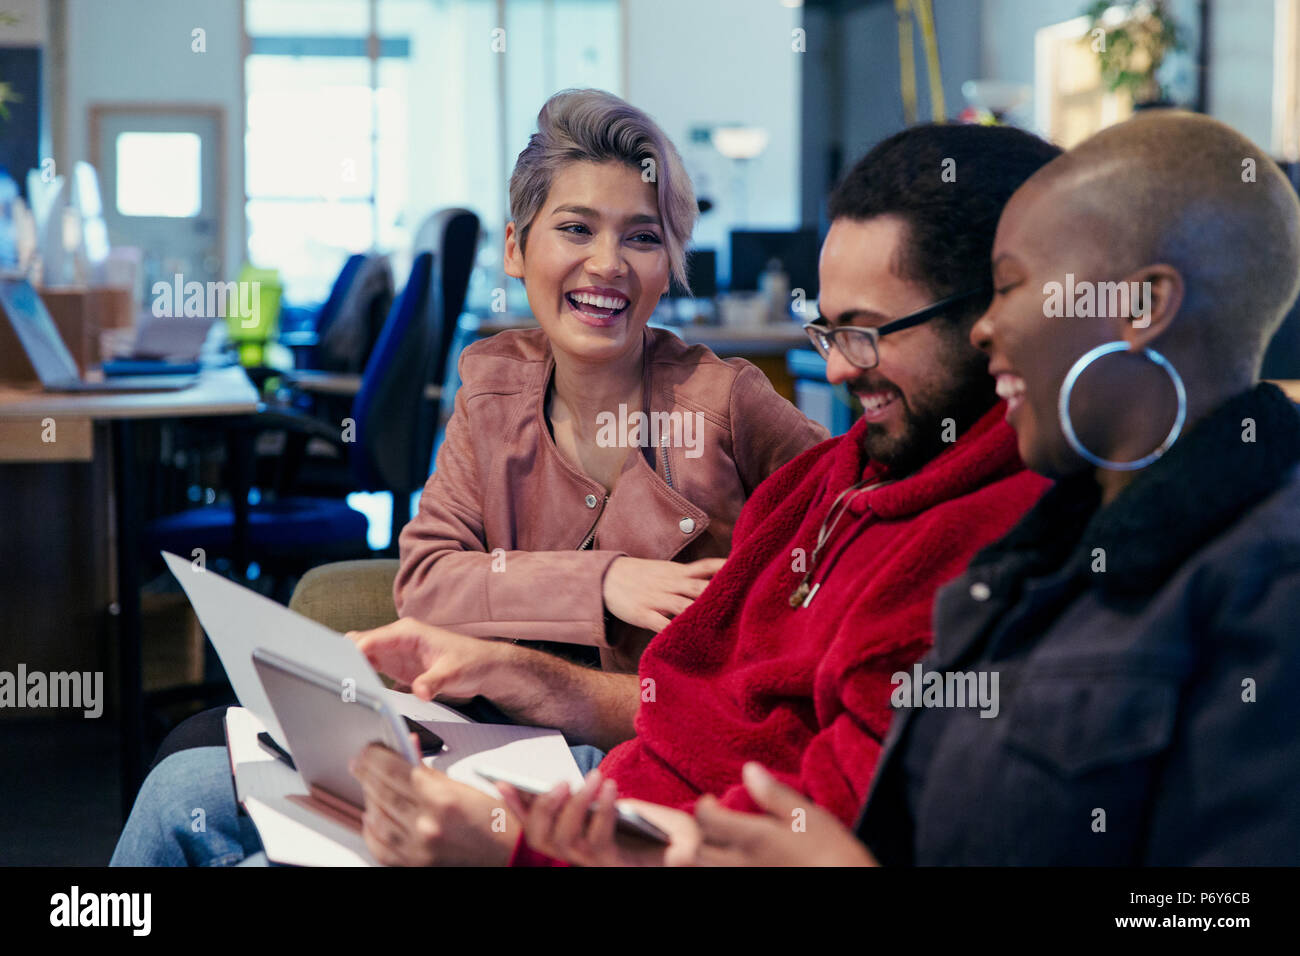 Laughing creative business people working in office Stock Photo